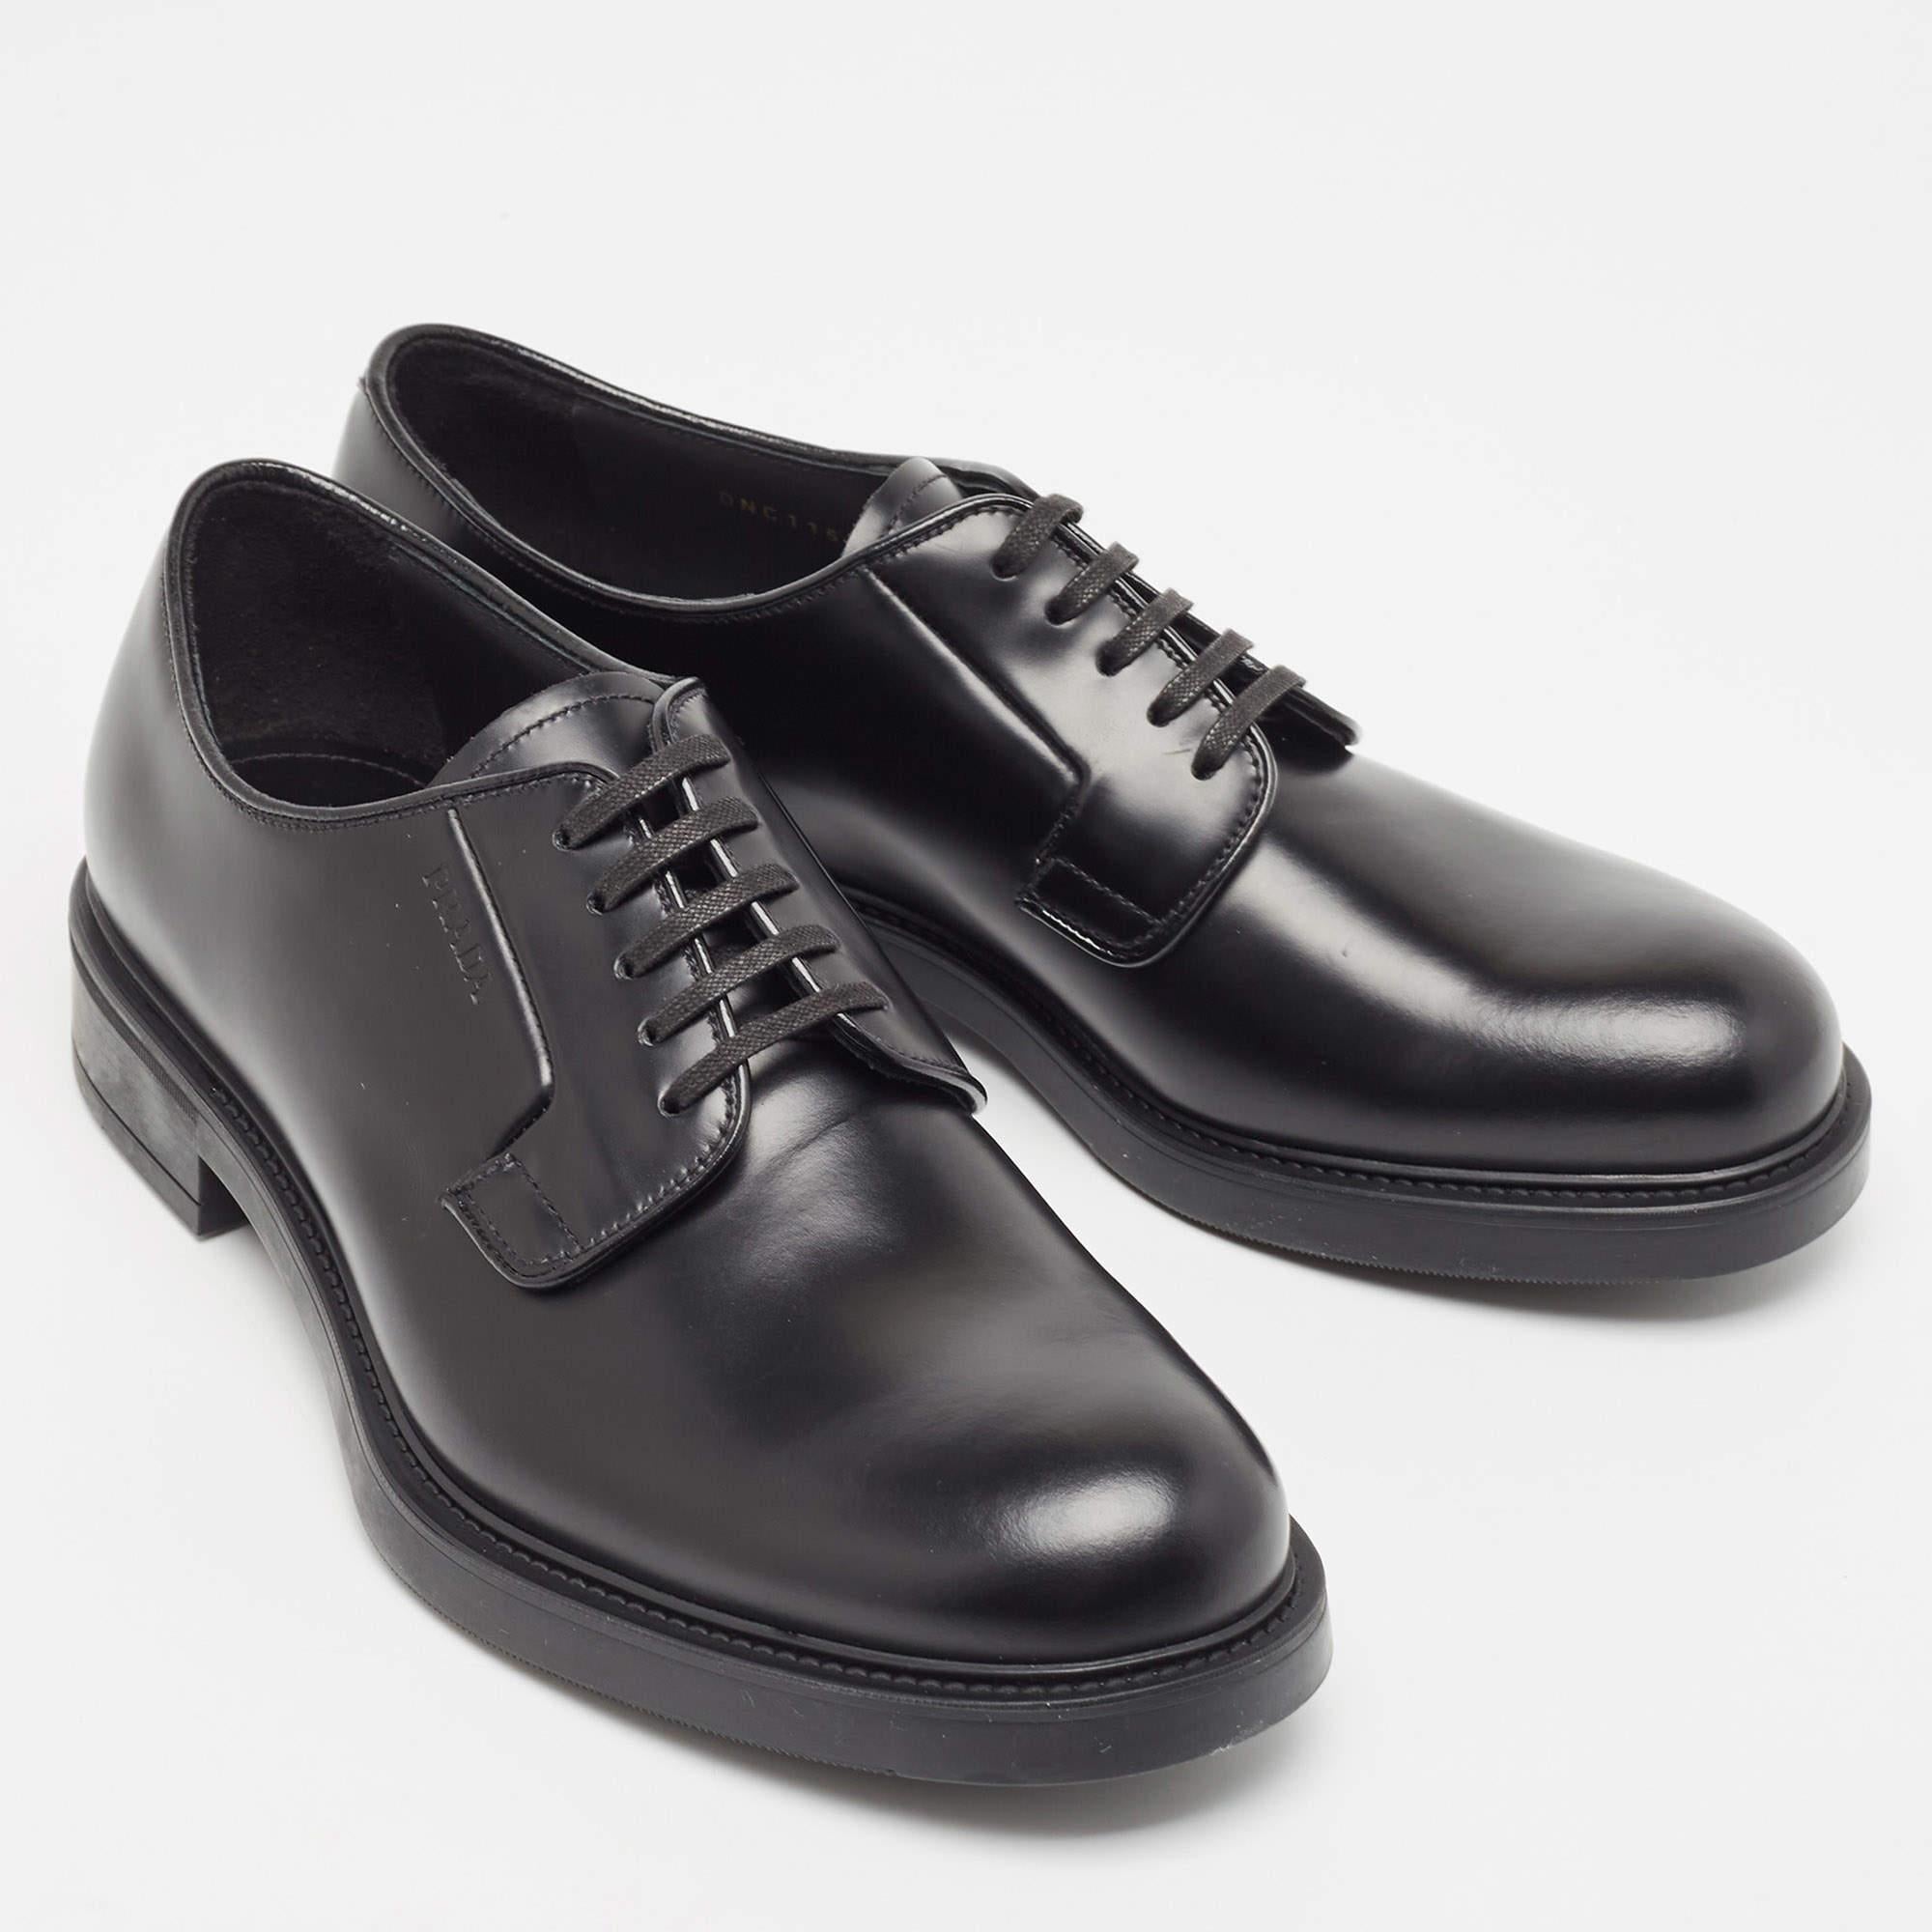 These oxfords are designed from the finest material featuring an elegant look, sturdy soles, and lace-ups on the vamps. Team these shoes with tailored pants and a blazer for a smart formal look.

Includes: Original Box